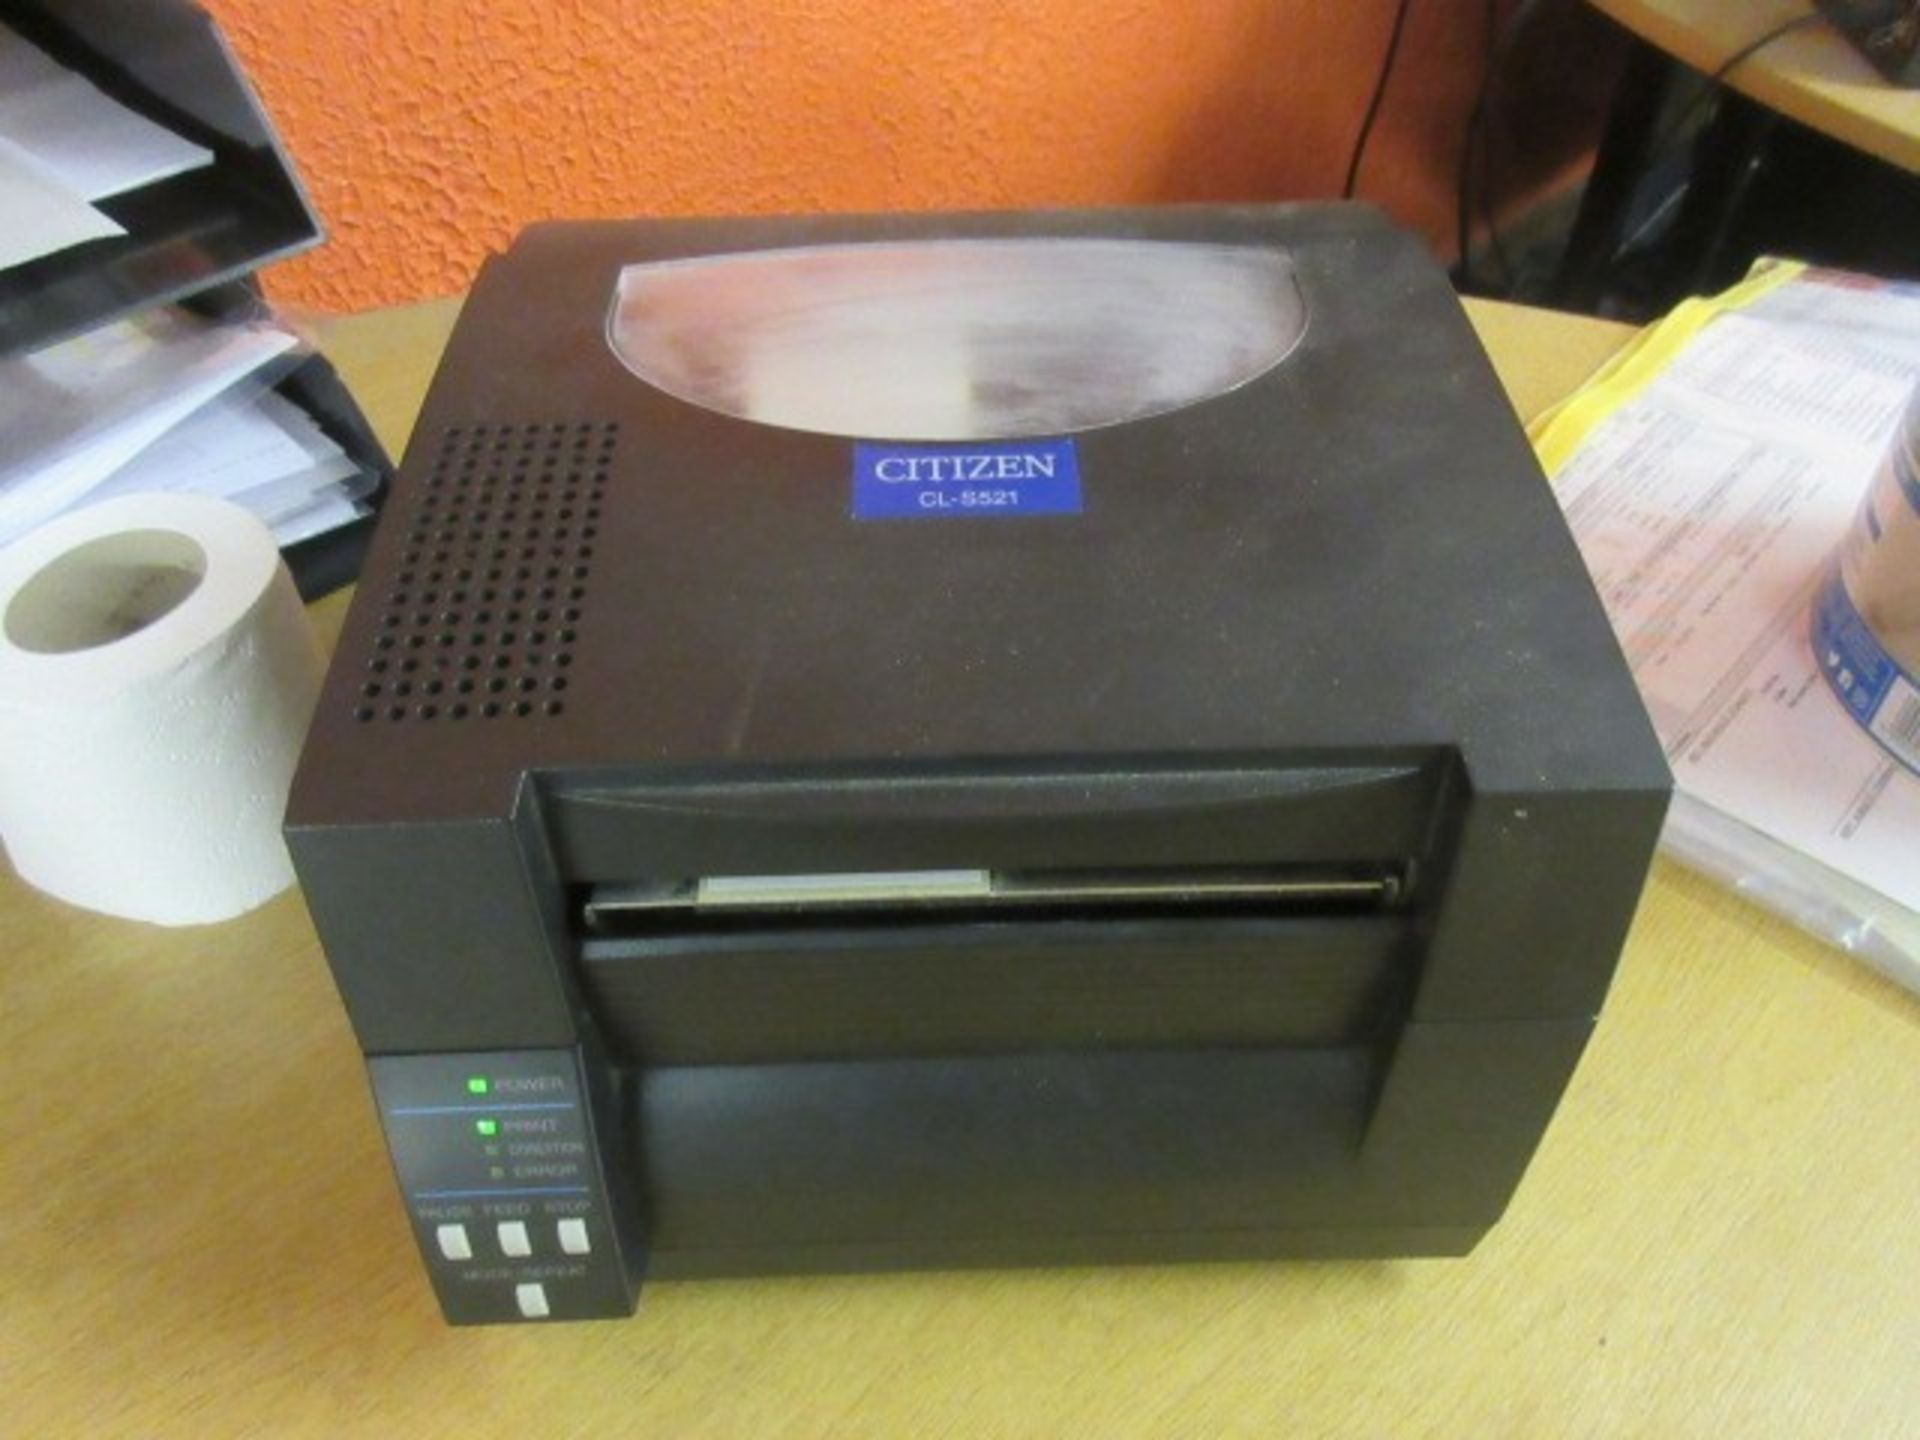 Citizen CL-S521 thermal label printer.